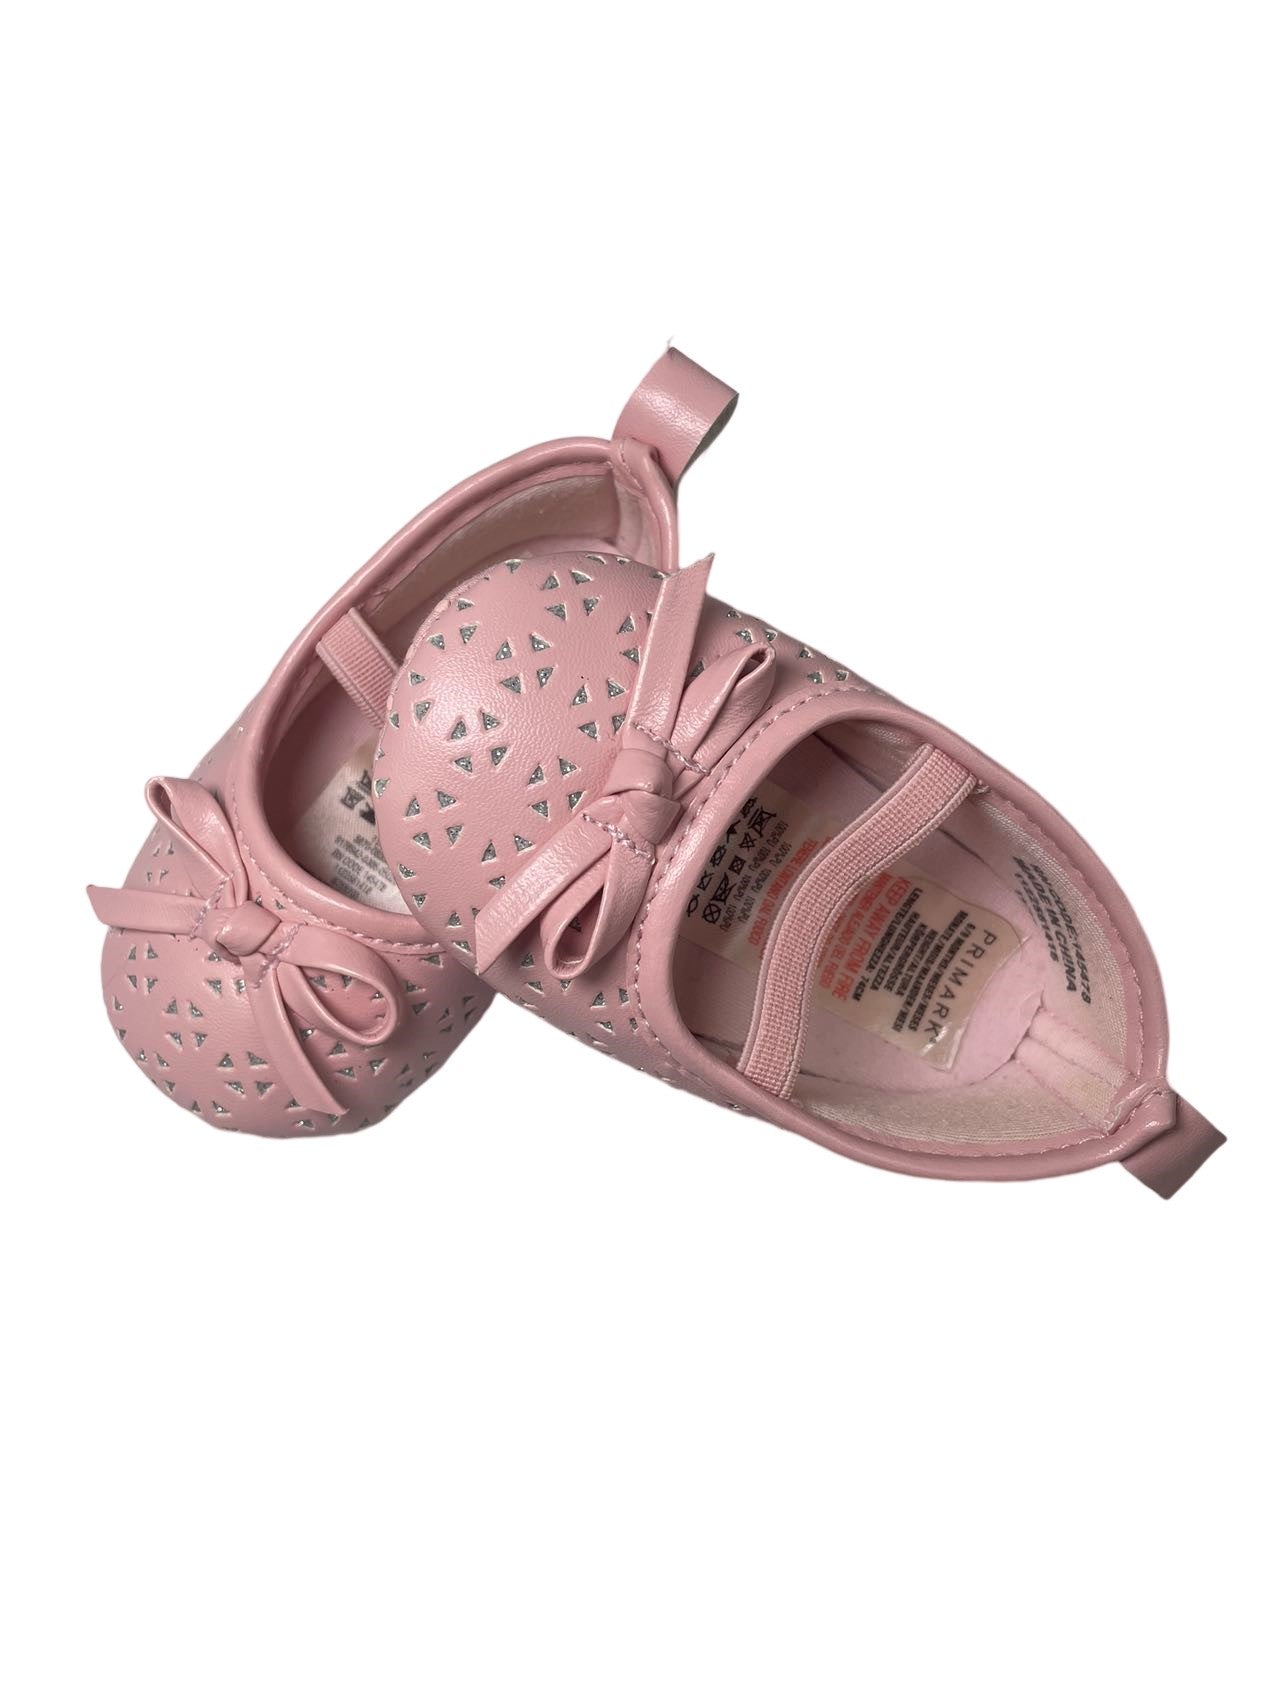 Baby Shoes (6-9M)